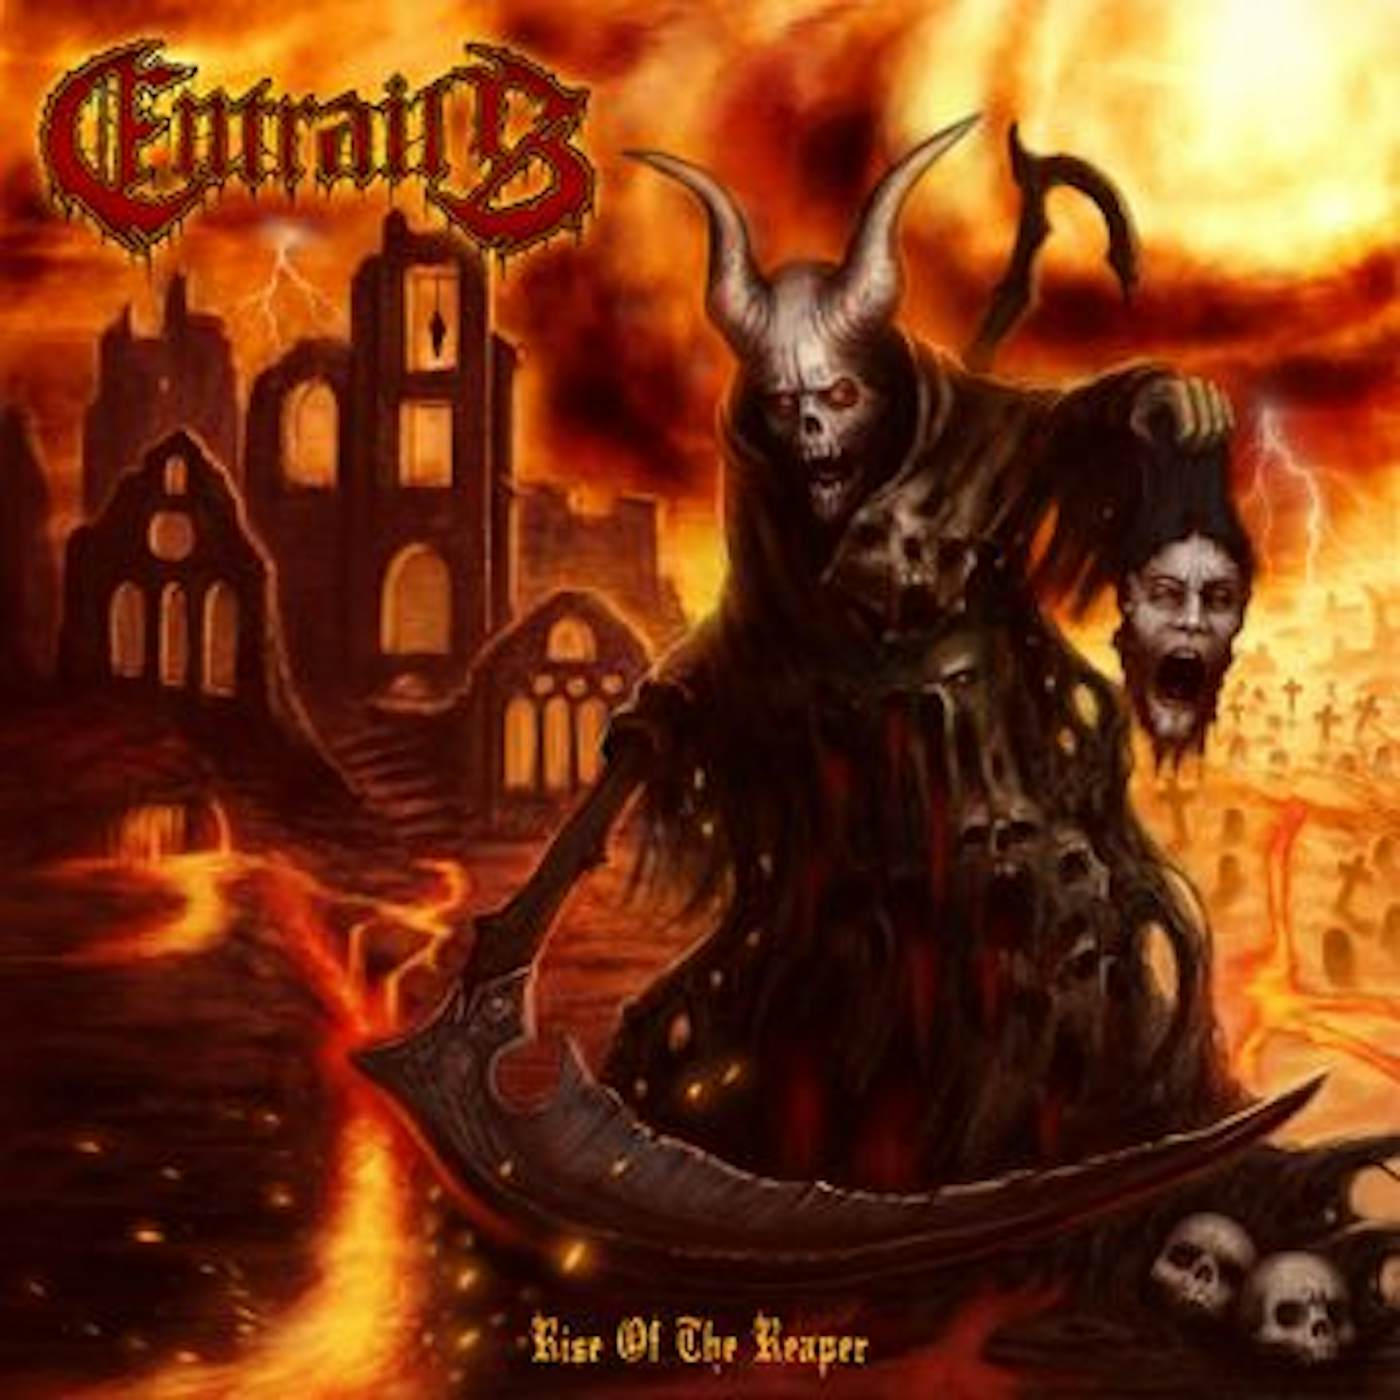 Entrails RISE OF THE REAPER CD